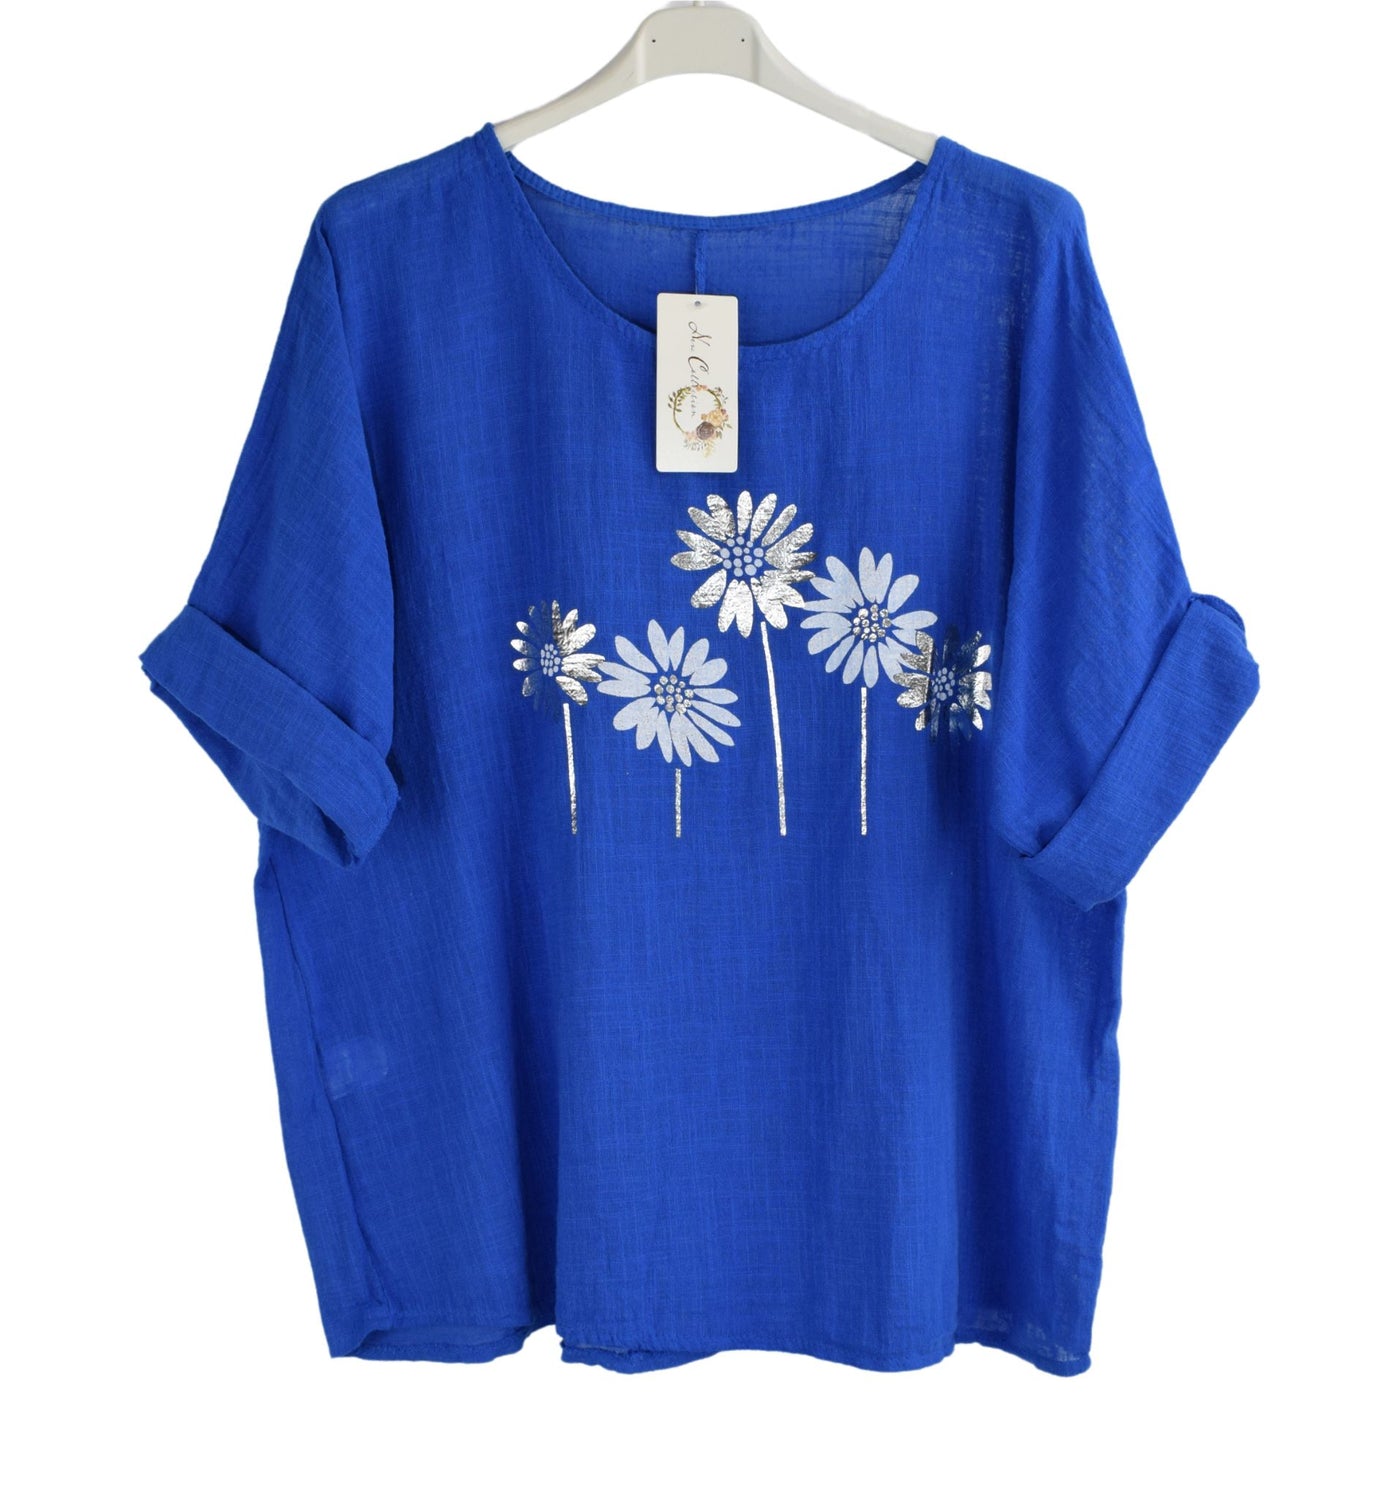 Foil Daisy Floral Cotton Top Women's Summer Tunic Tee Lightweight Holiday Top